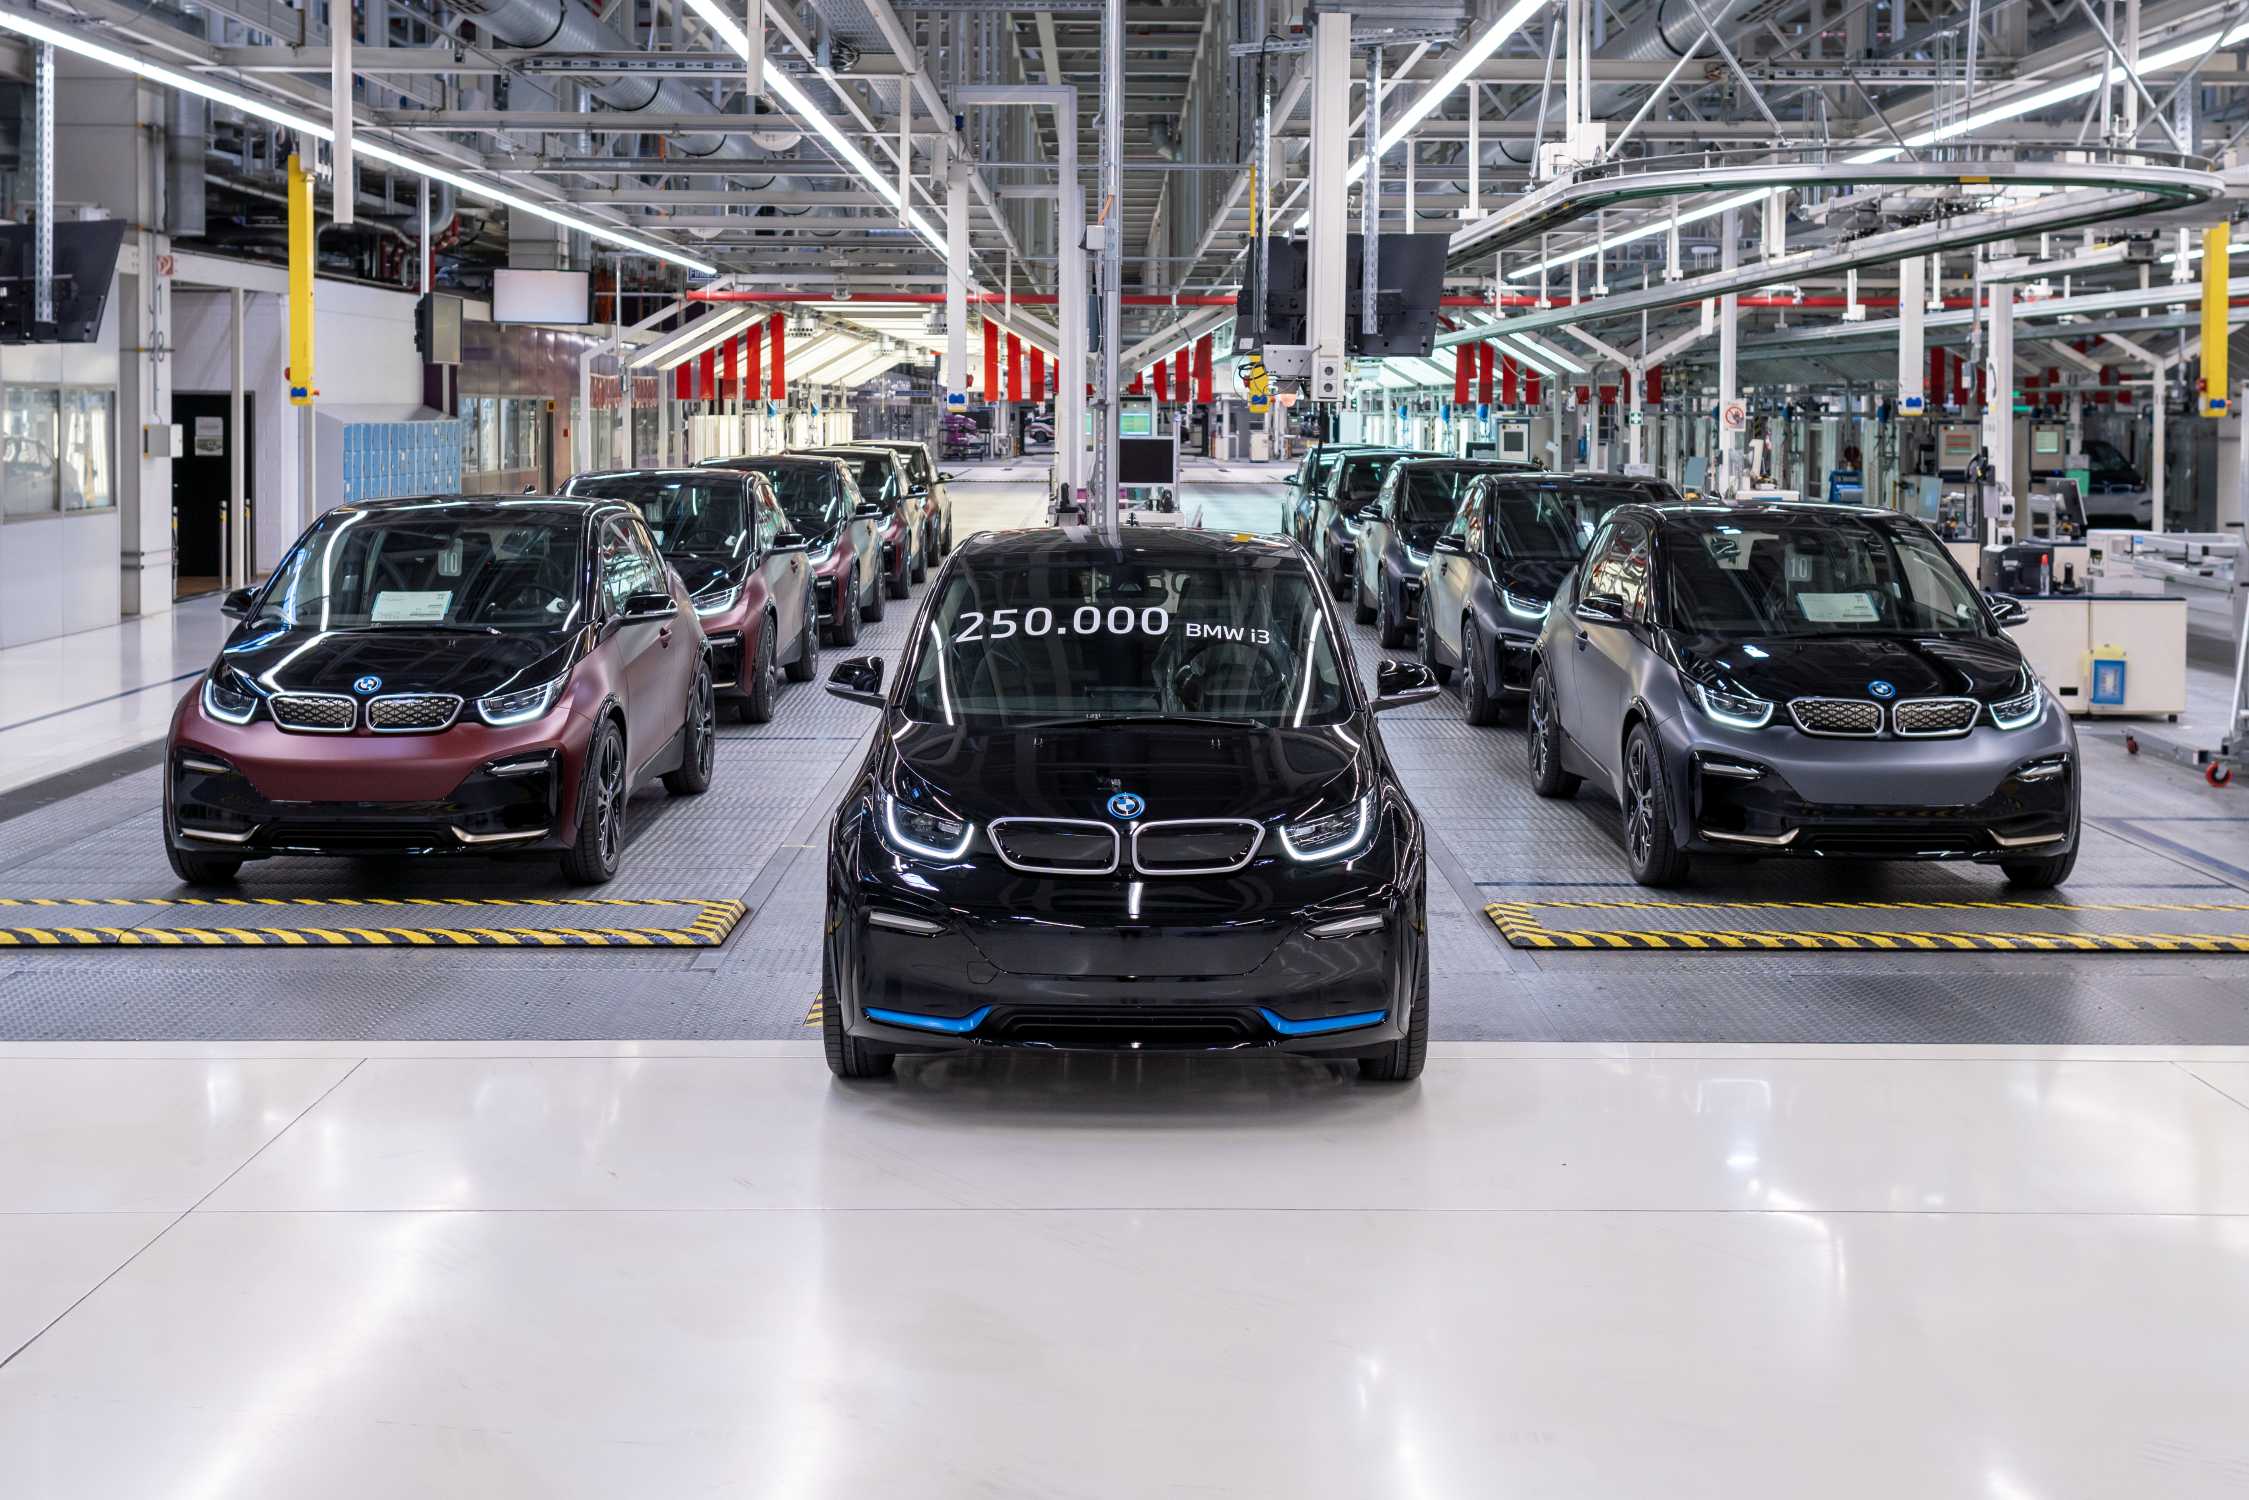 https://mediapool.bmwgroup.com/cache/P9/202206/P90471117/P90471117-the-250-000th-bmw-i3-together-with-the-bmw-i3s-of-the-homerun-edition-from-the-bmw-group-plant-leipz-2249px.jpg